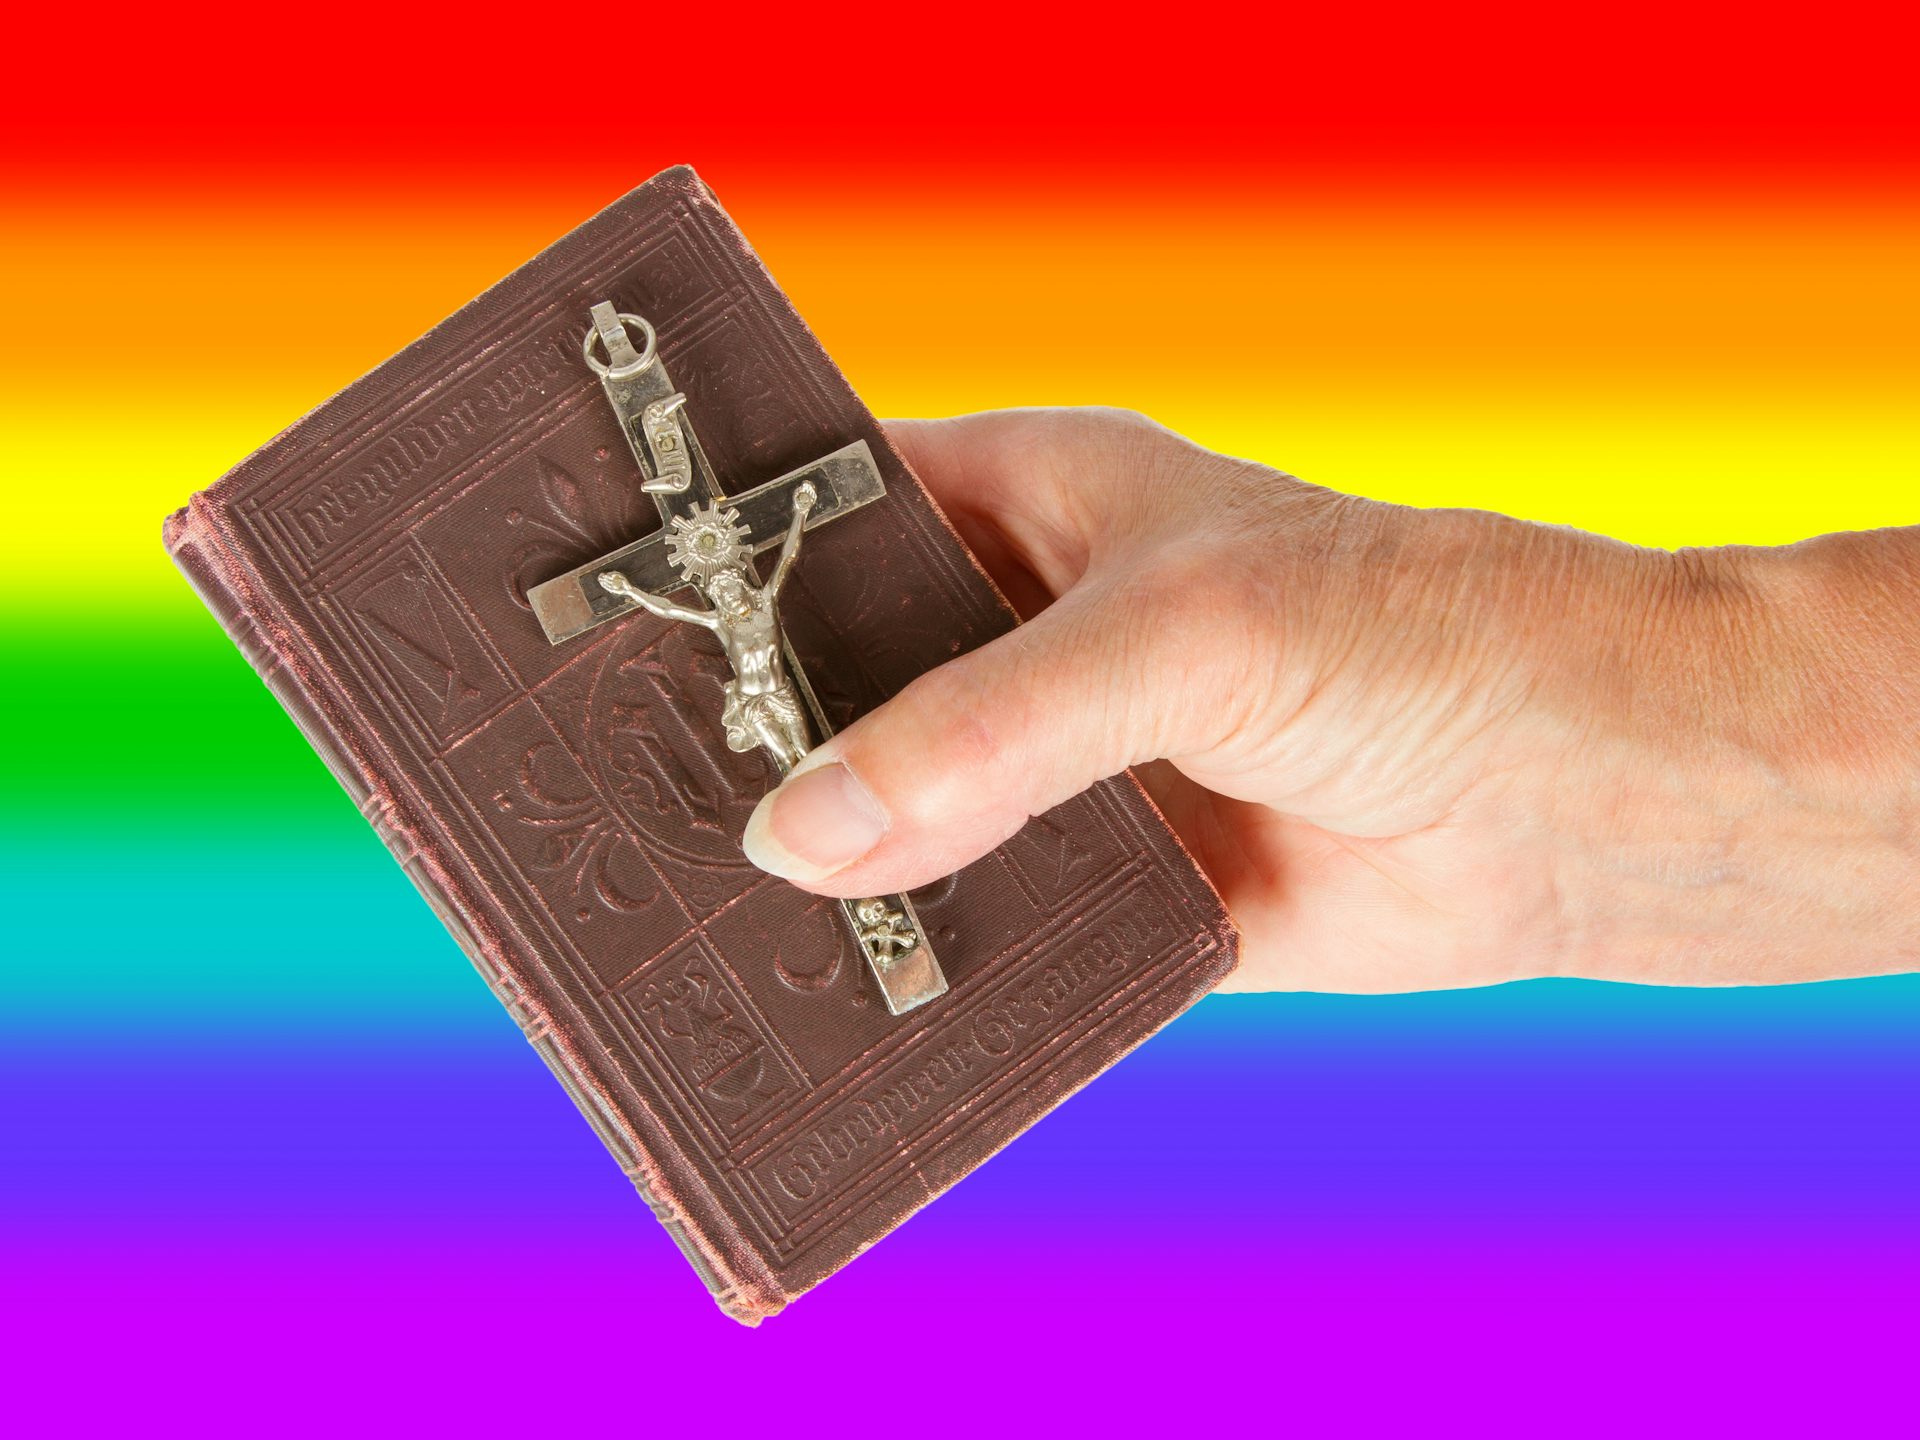 Welcoming, but not affirming being gay and Christian